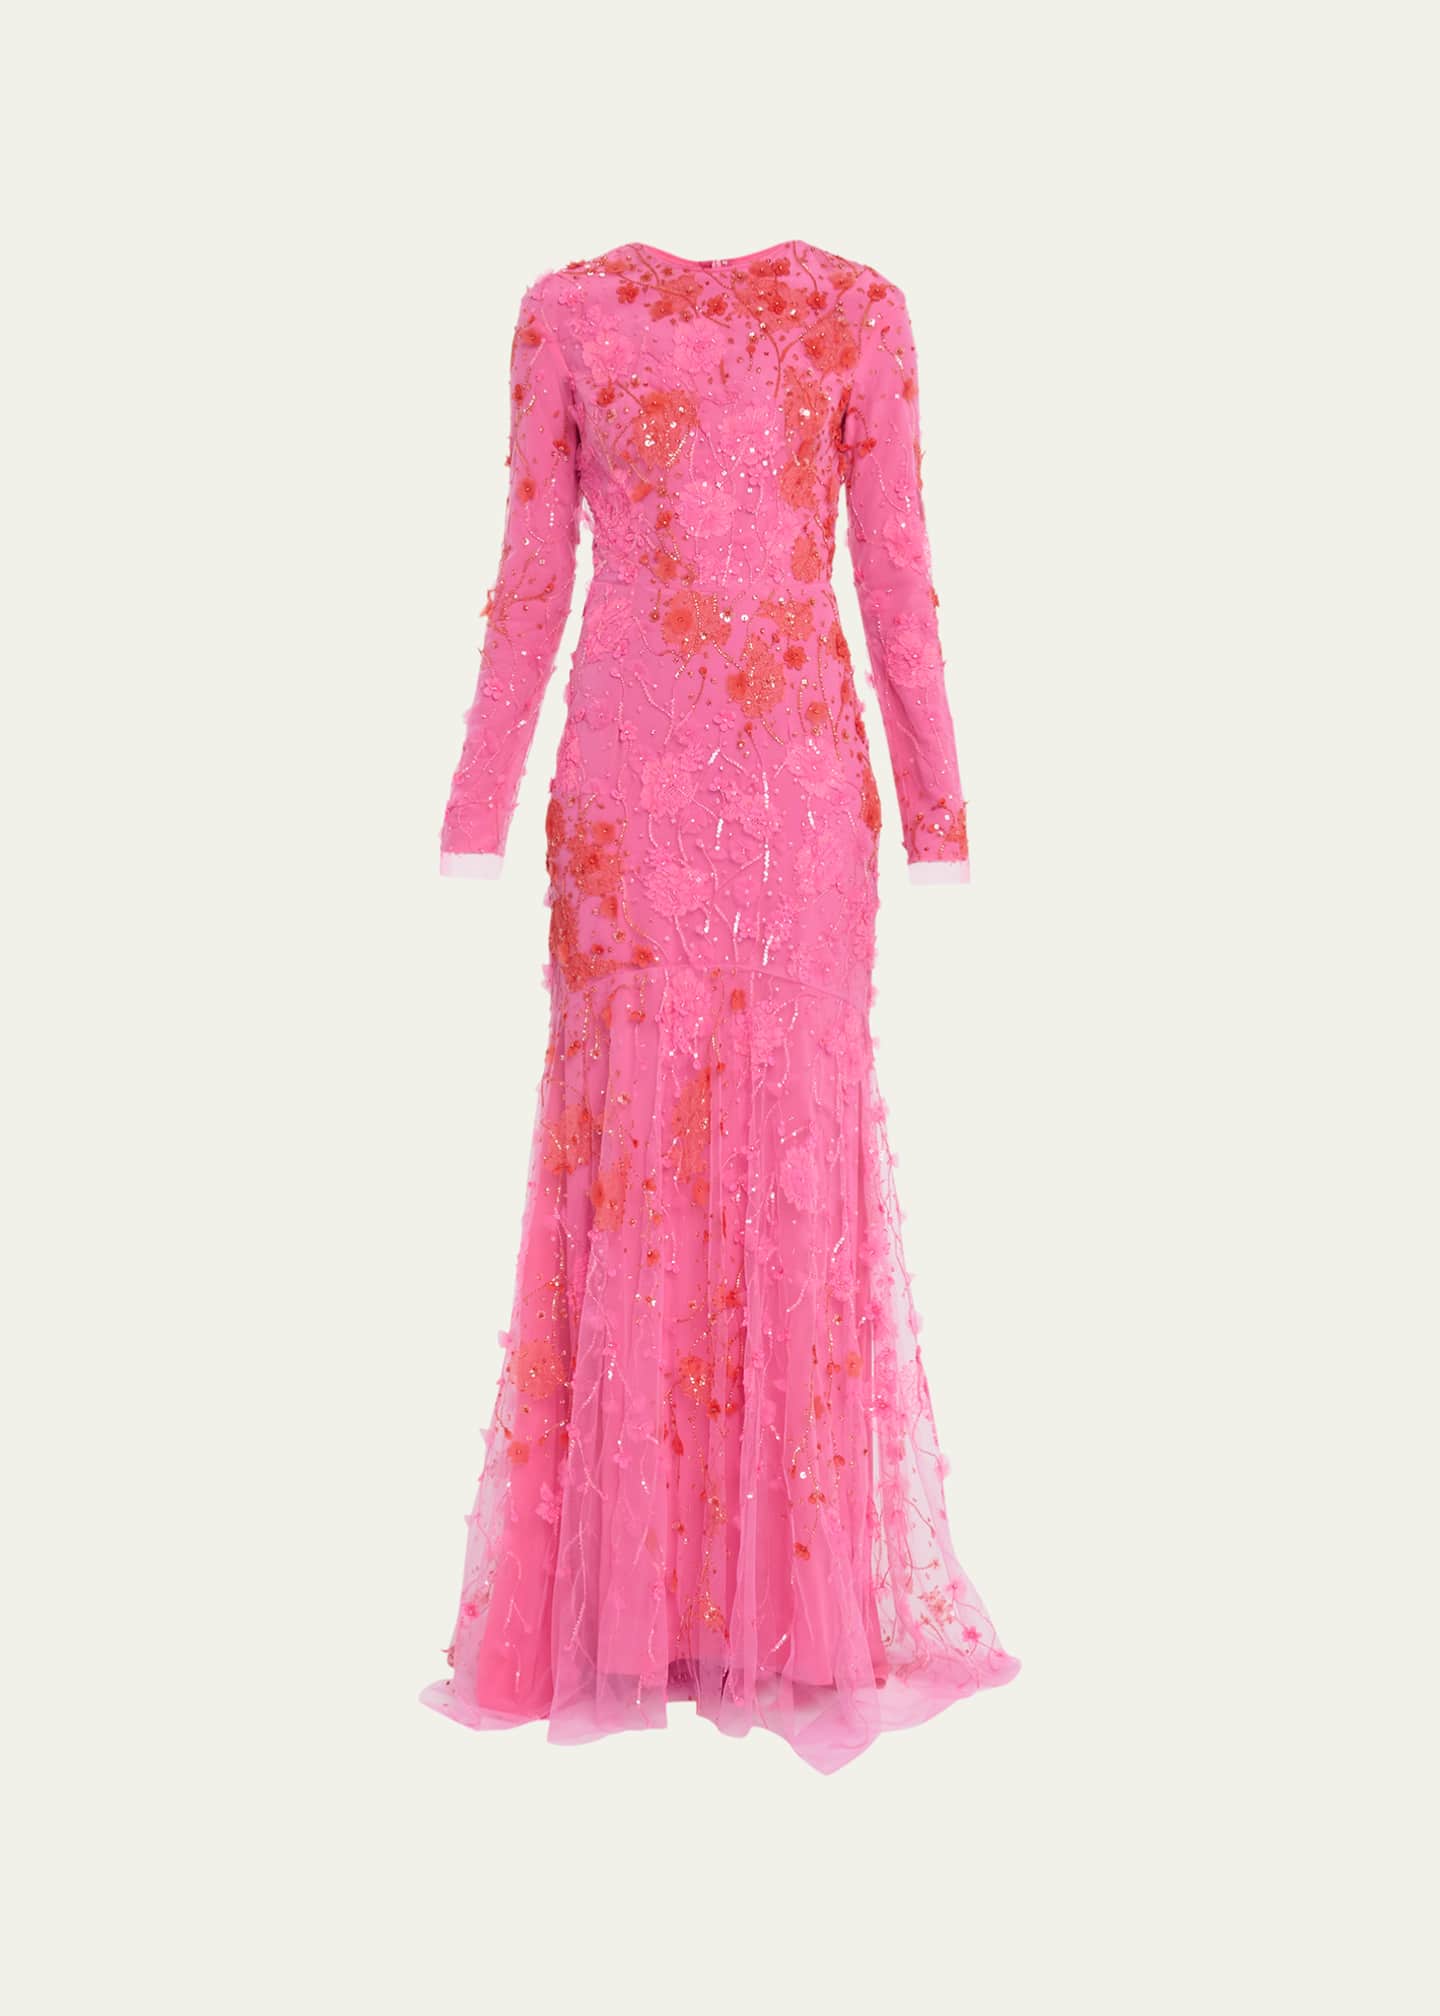 Monique Lhuillier Embroidered Floral Evening Gown - Bergdorf Goodman